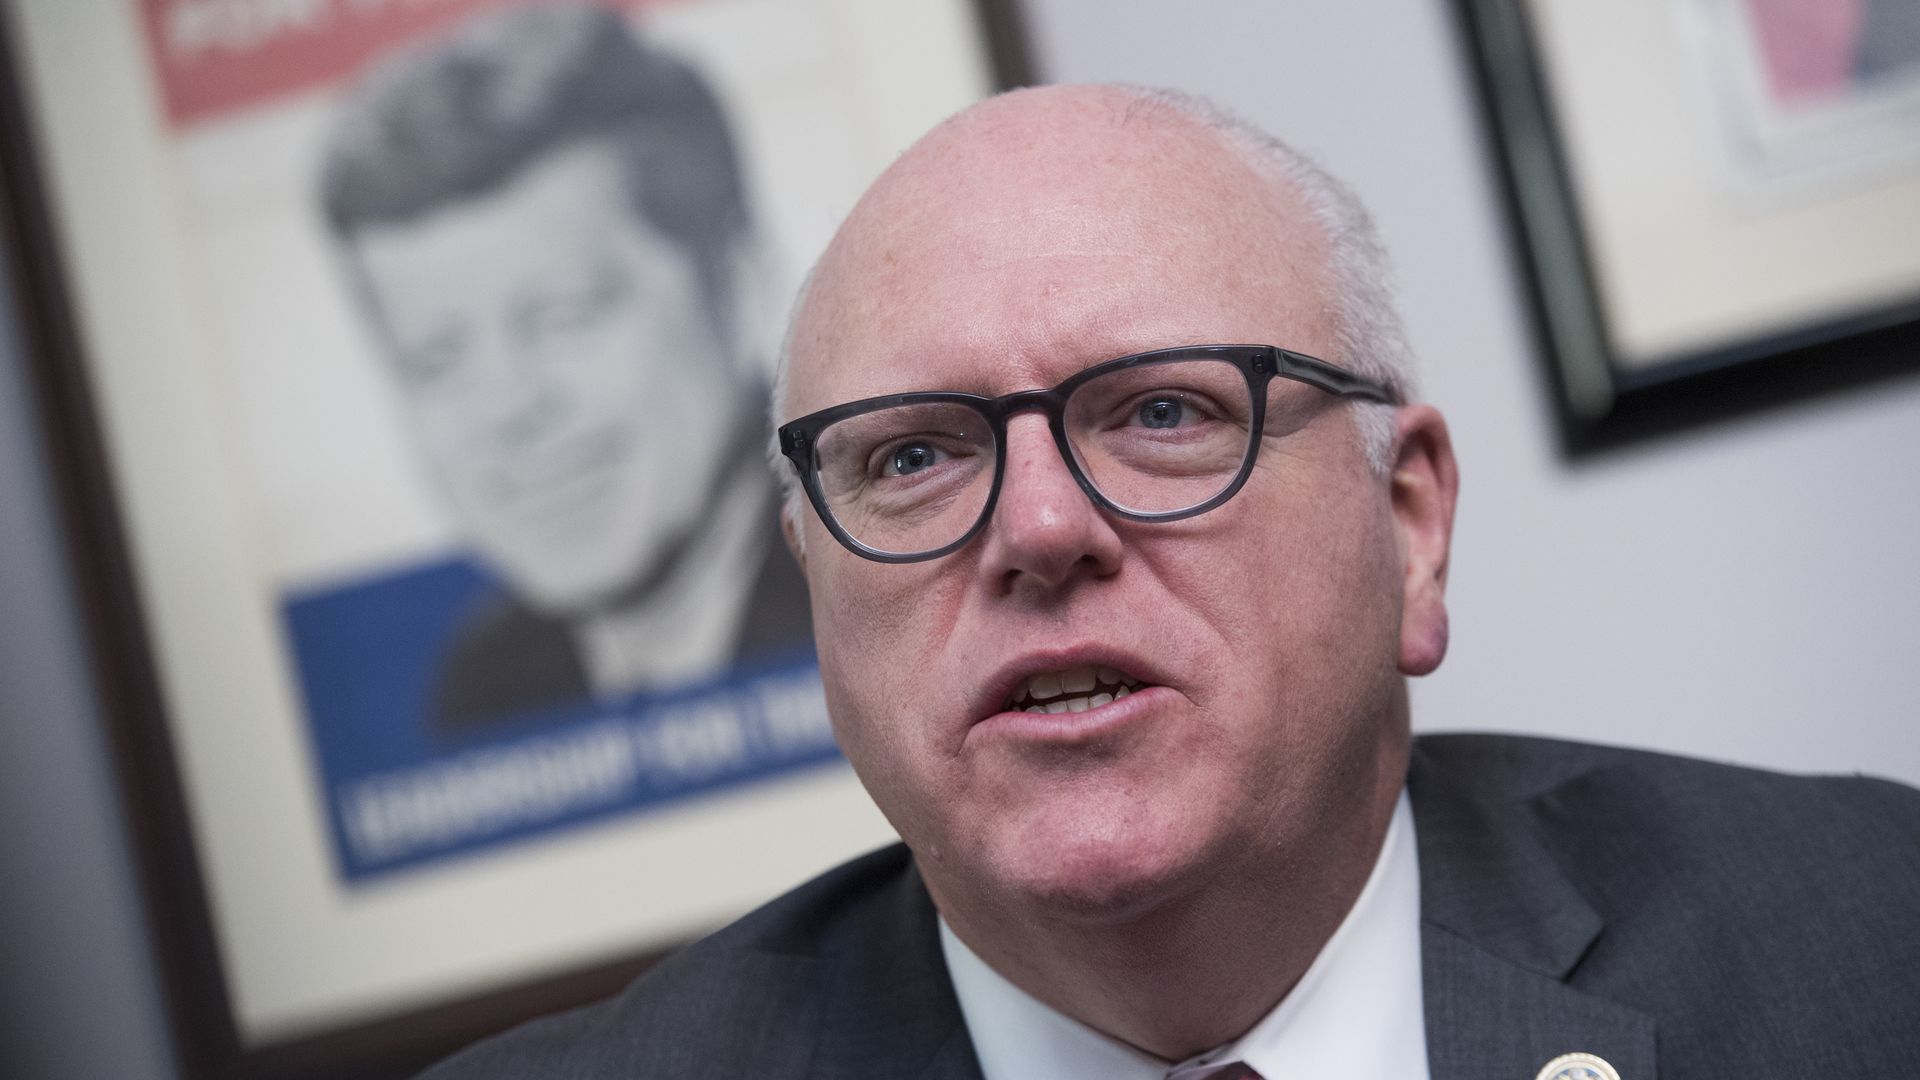 Former Rep. Joe Crowley is seen speaking in front of a 1960 "JFK For President" campaign poster.